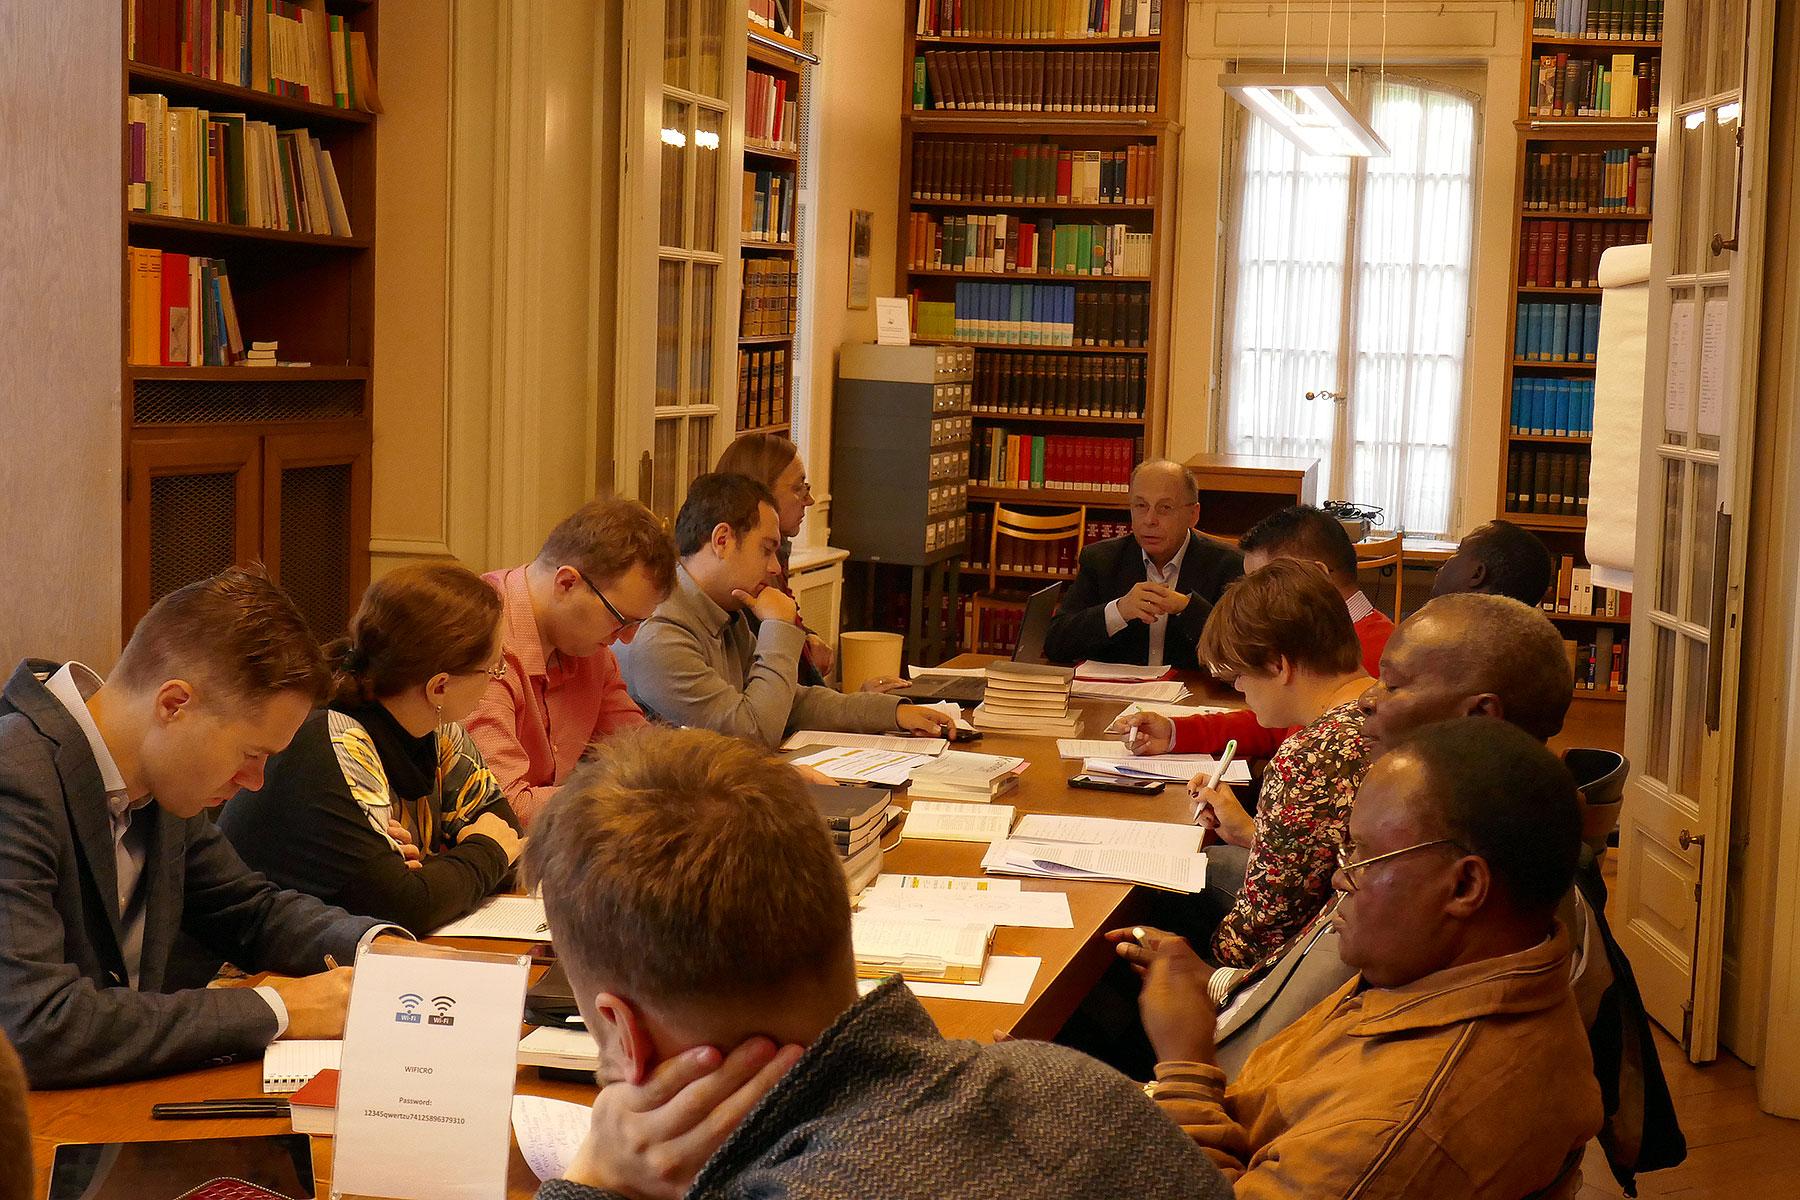 Participants of the first seminar âStudying Ecumenism in Strasbourgâ during one of the intensive working sessions. Photo: Elke Leypold, Institute for Ecumenical Research